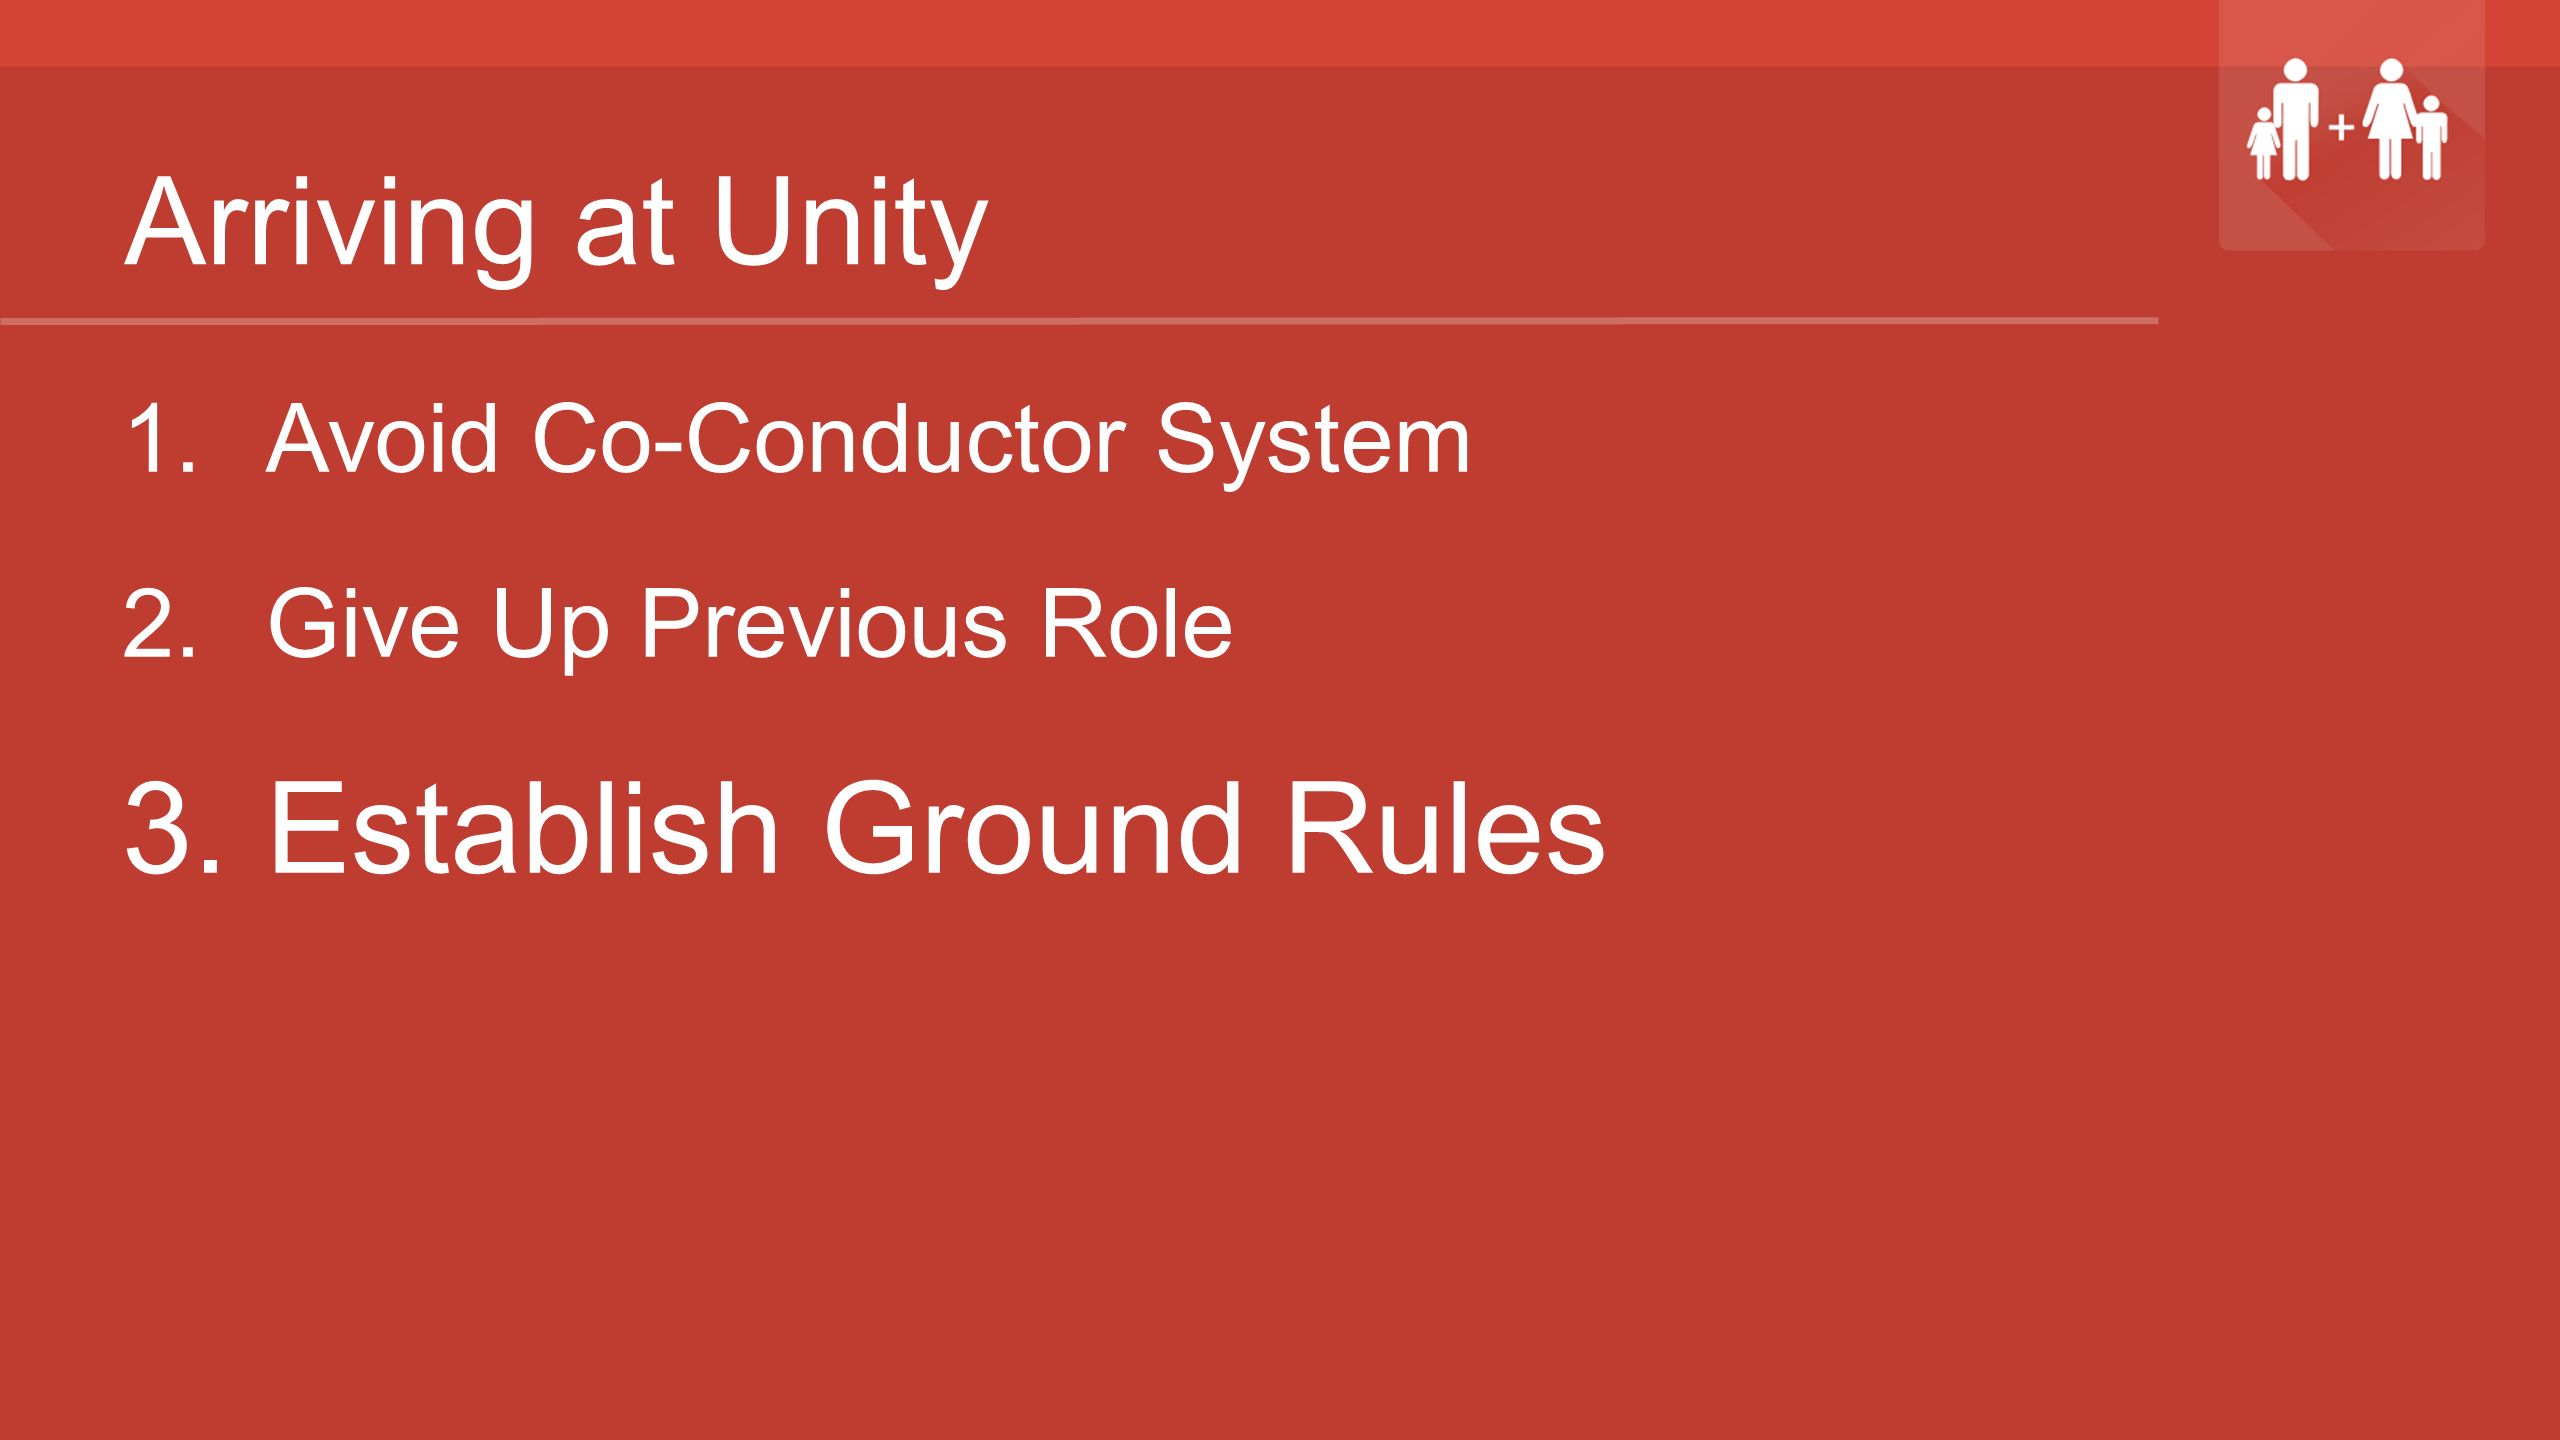 Arriving at Unity 1. Avoid Co-Conductor System 2. Give Up Previous Role 3. Establish Ground Rules